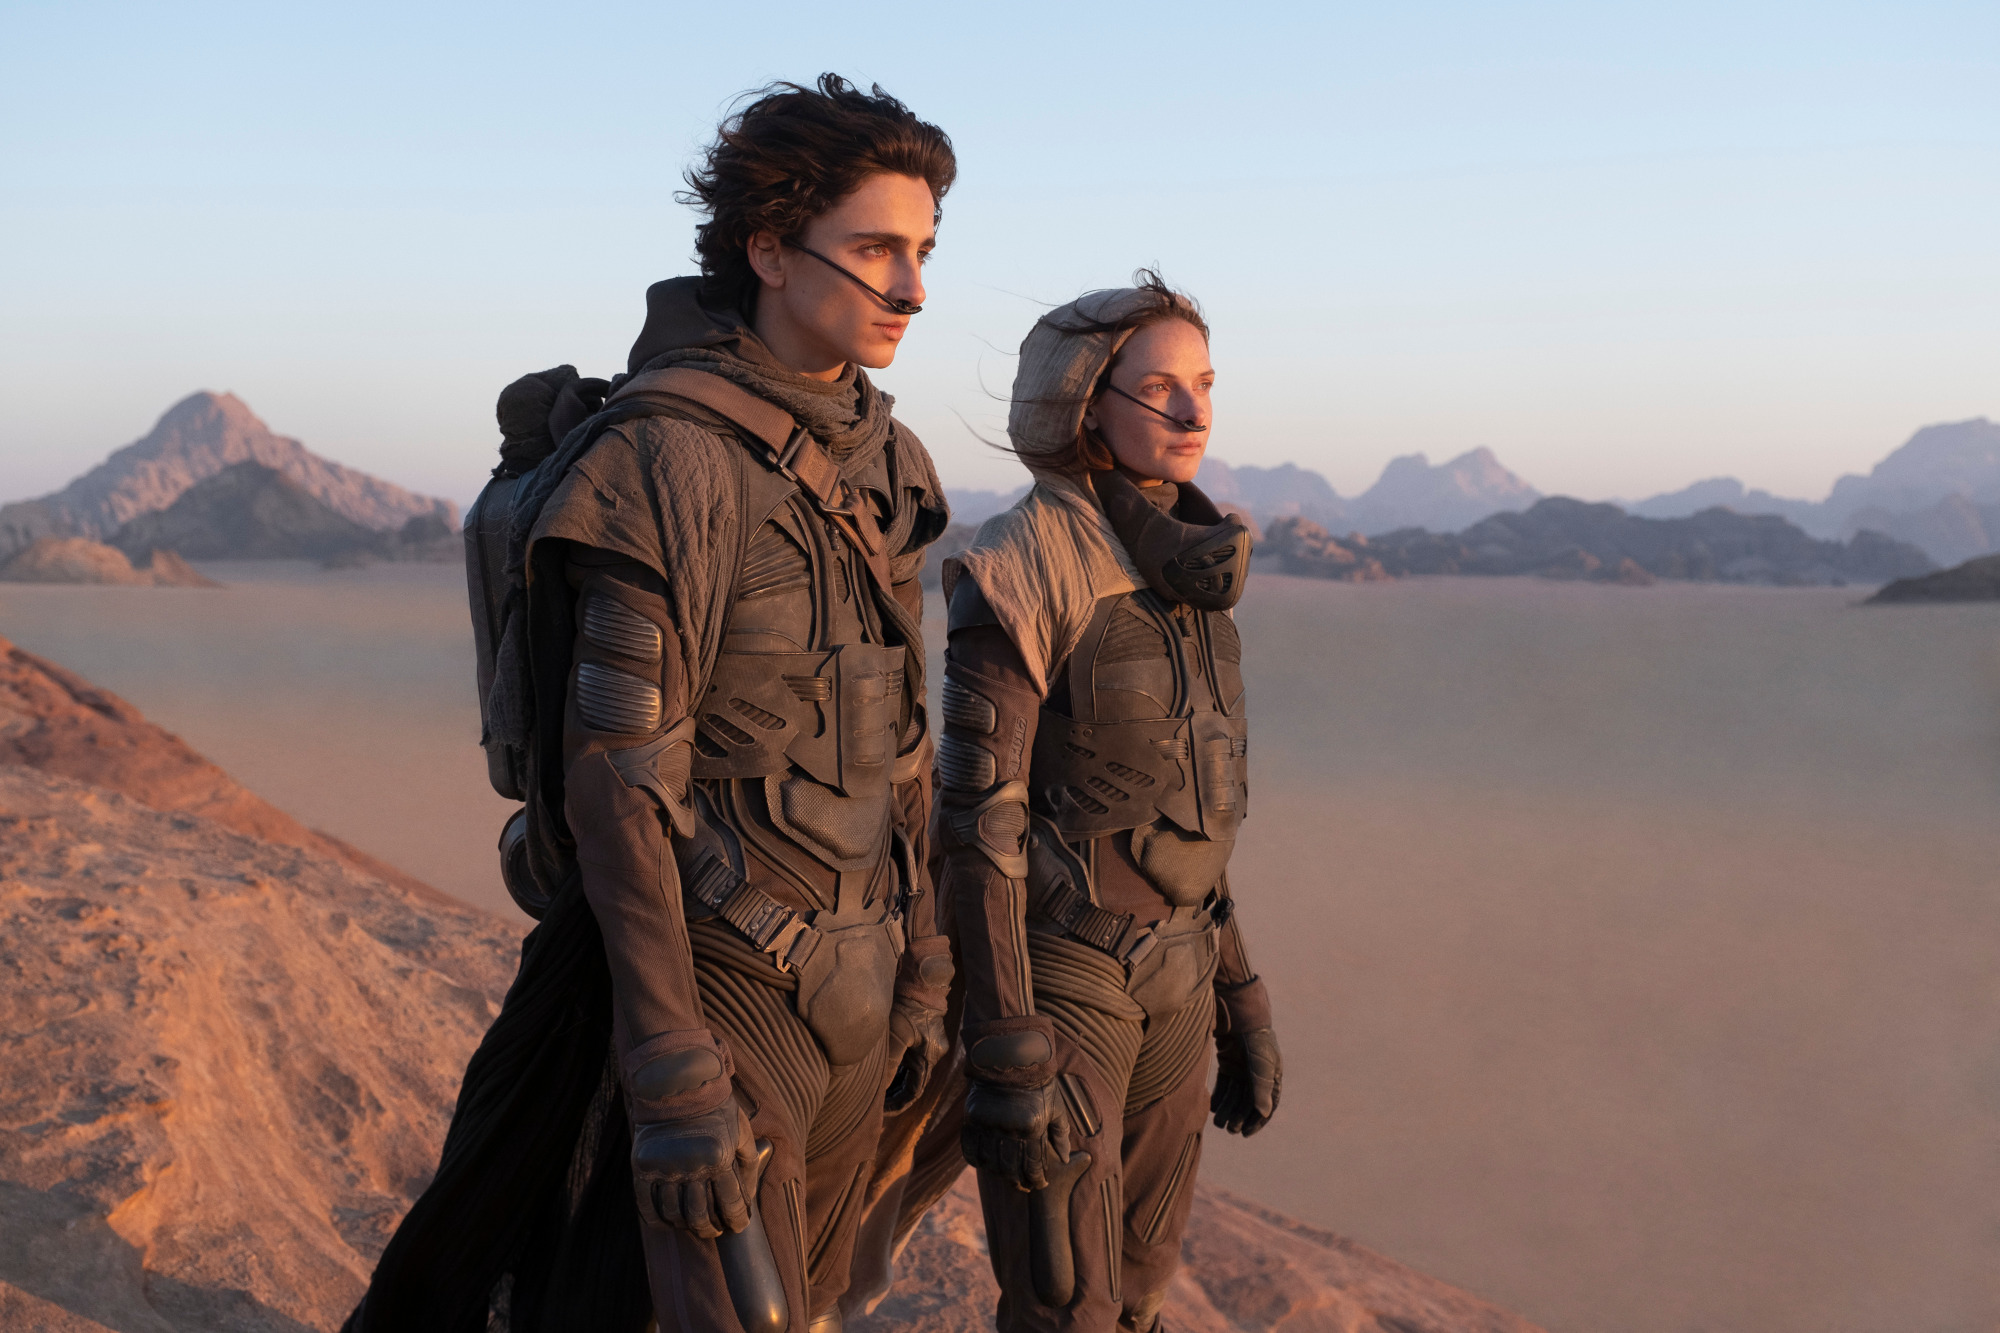 2022 Best Picture nominee 'Dune.' The image features Timothée Chalamet as Paul Atreides and Rebecca Ferguson as Lady Jessica Atreides. They're standing in the desert.